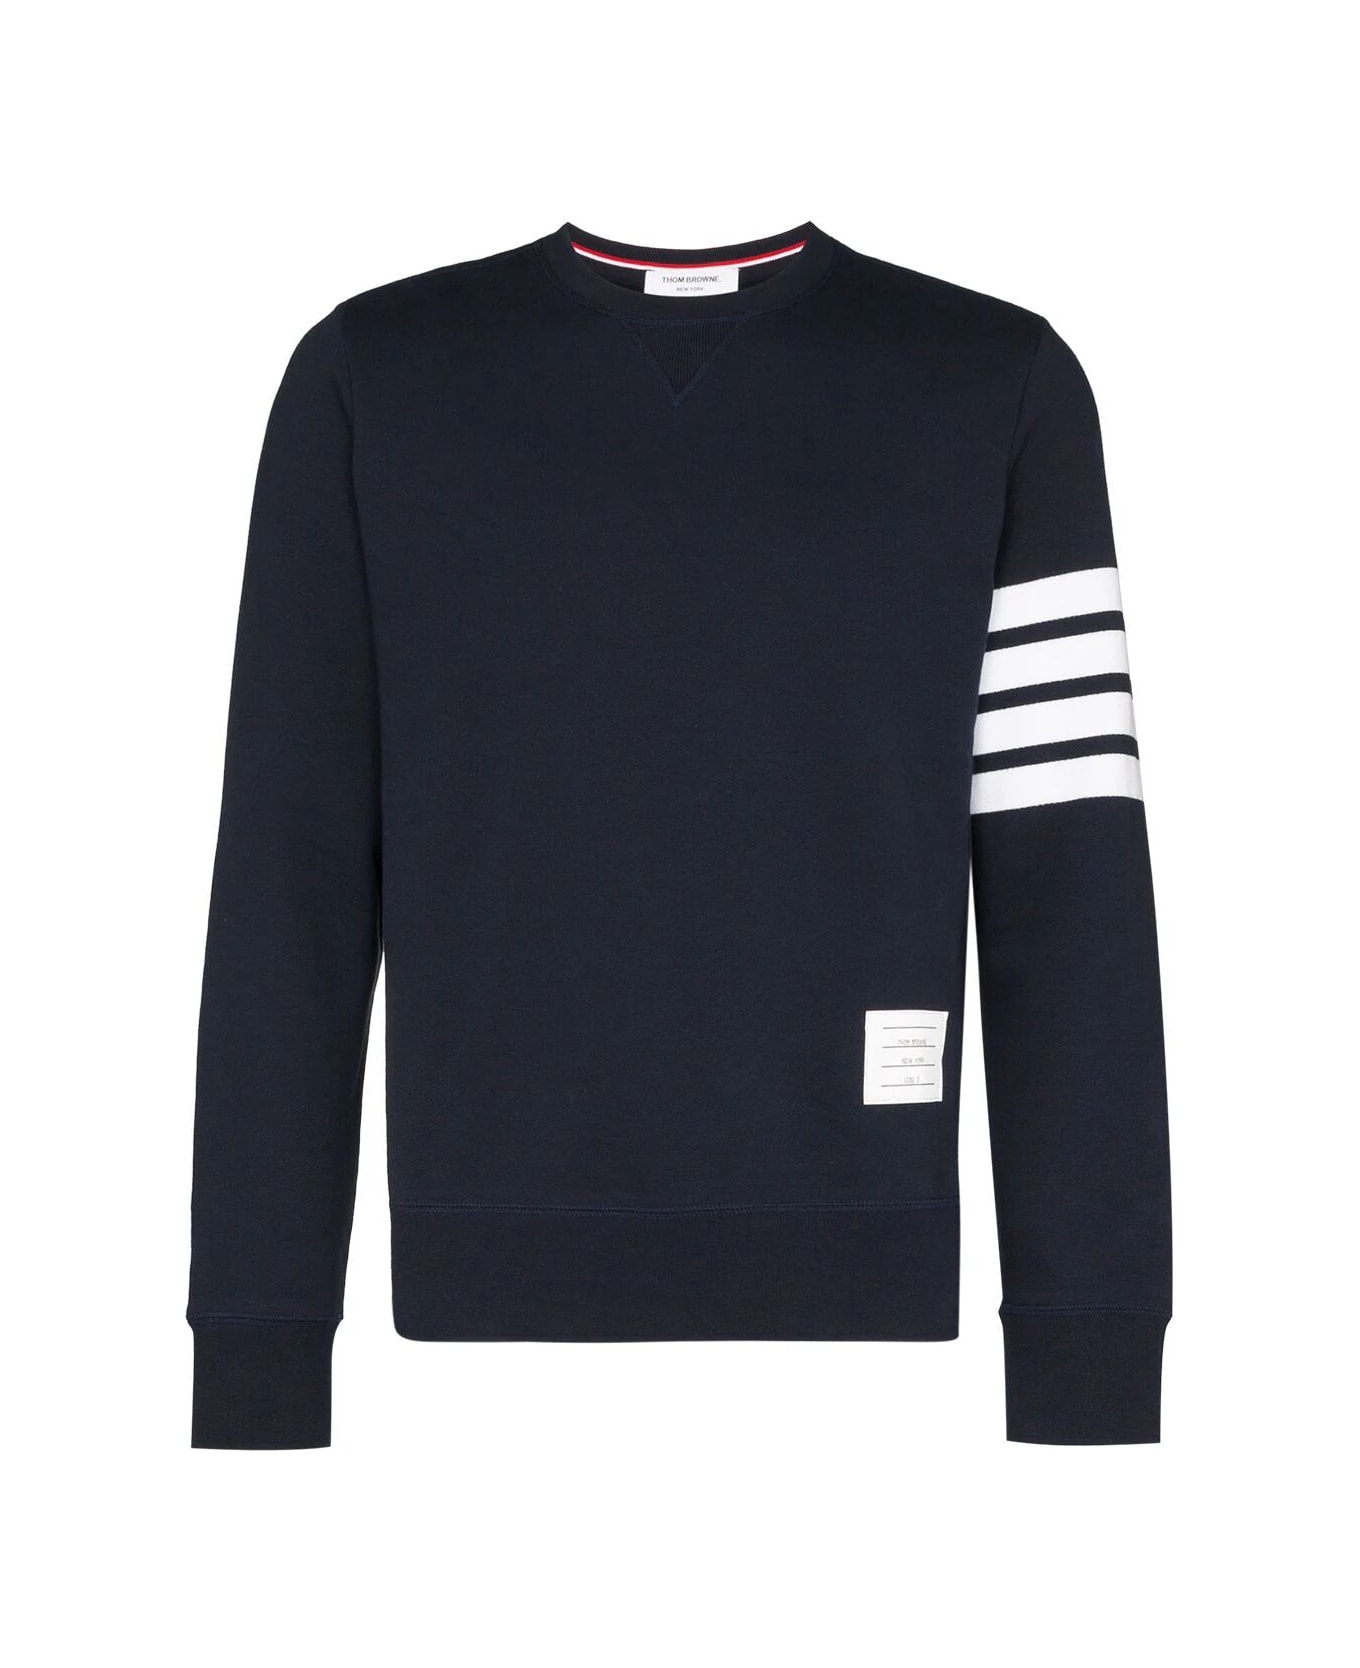 Thom Browne Classic Sweatshirt In Classic Loopback With Engineered 4 Bar - Navy